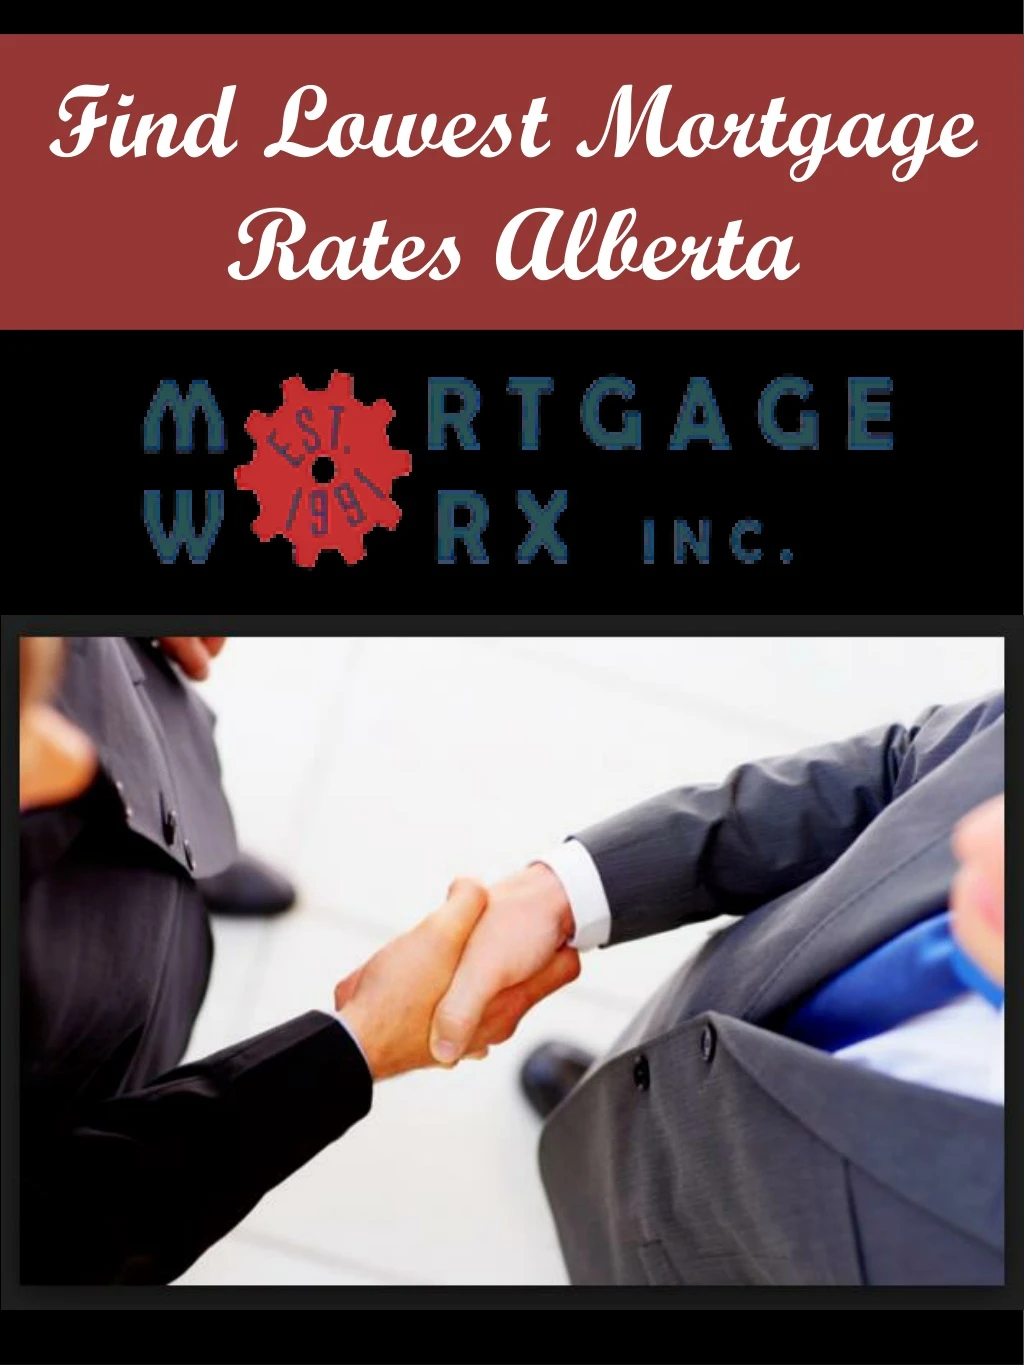 find lowest mortgage rates alberta